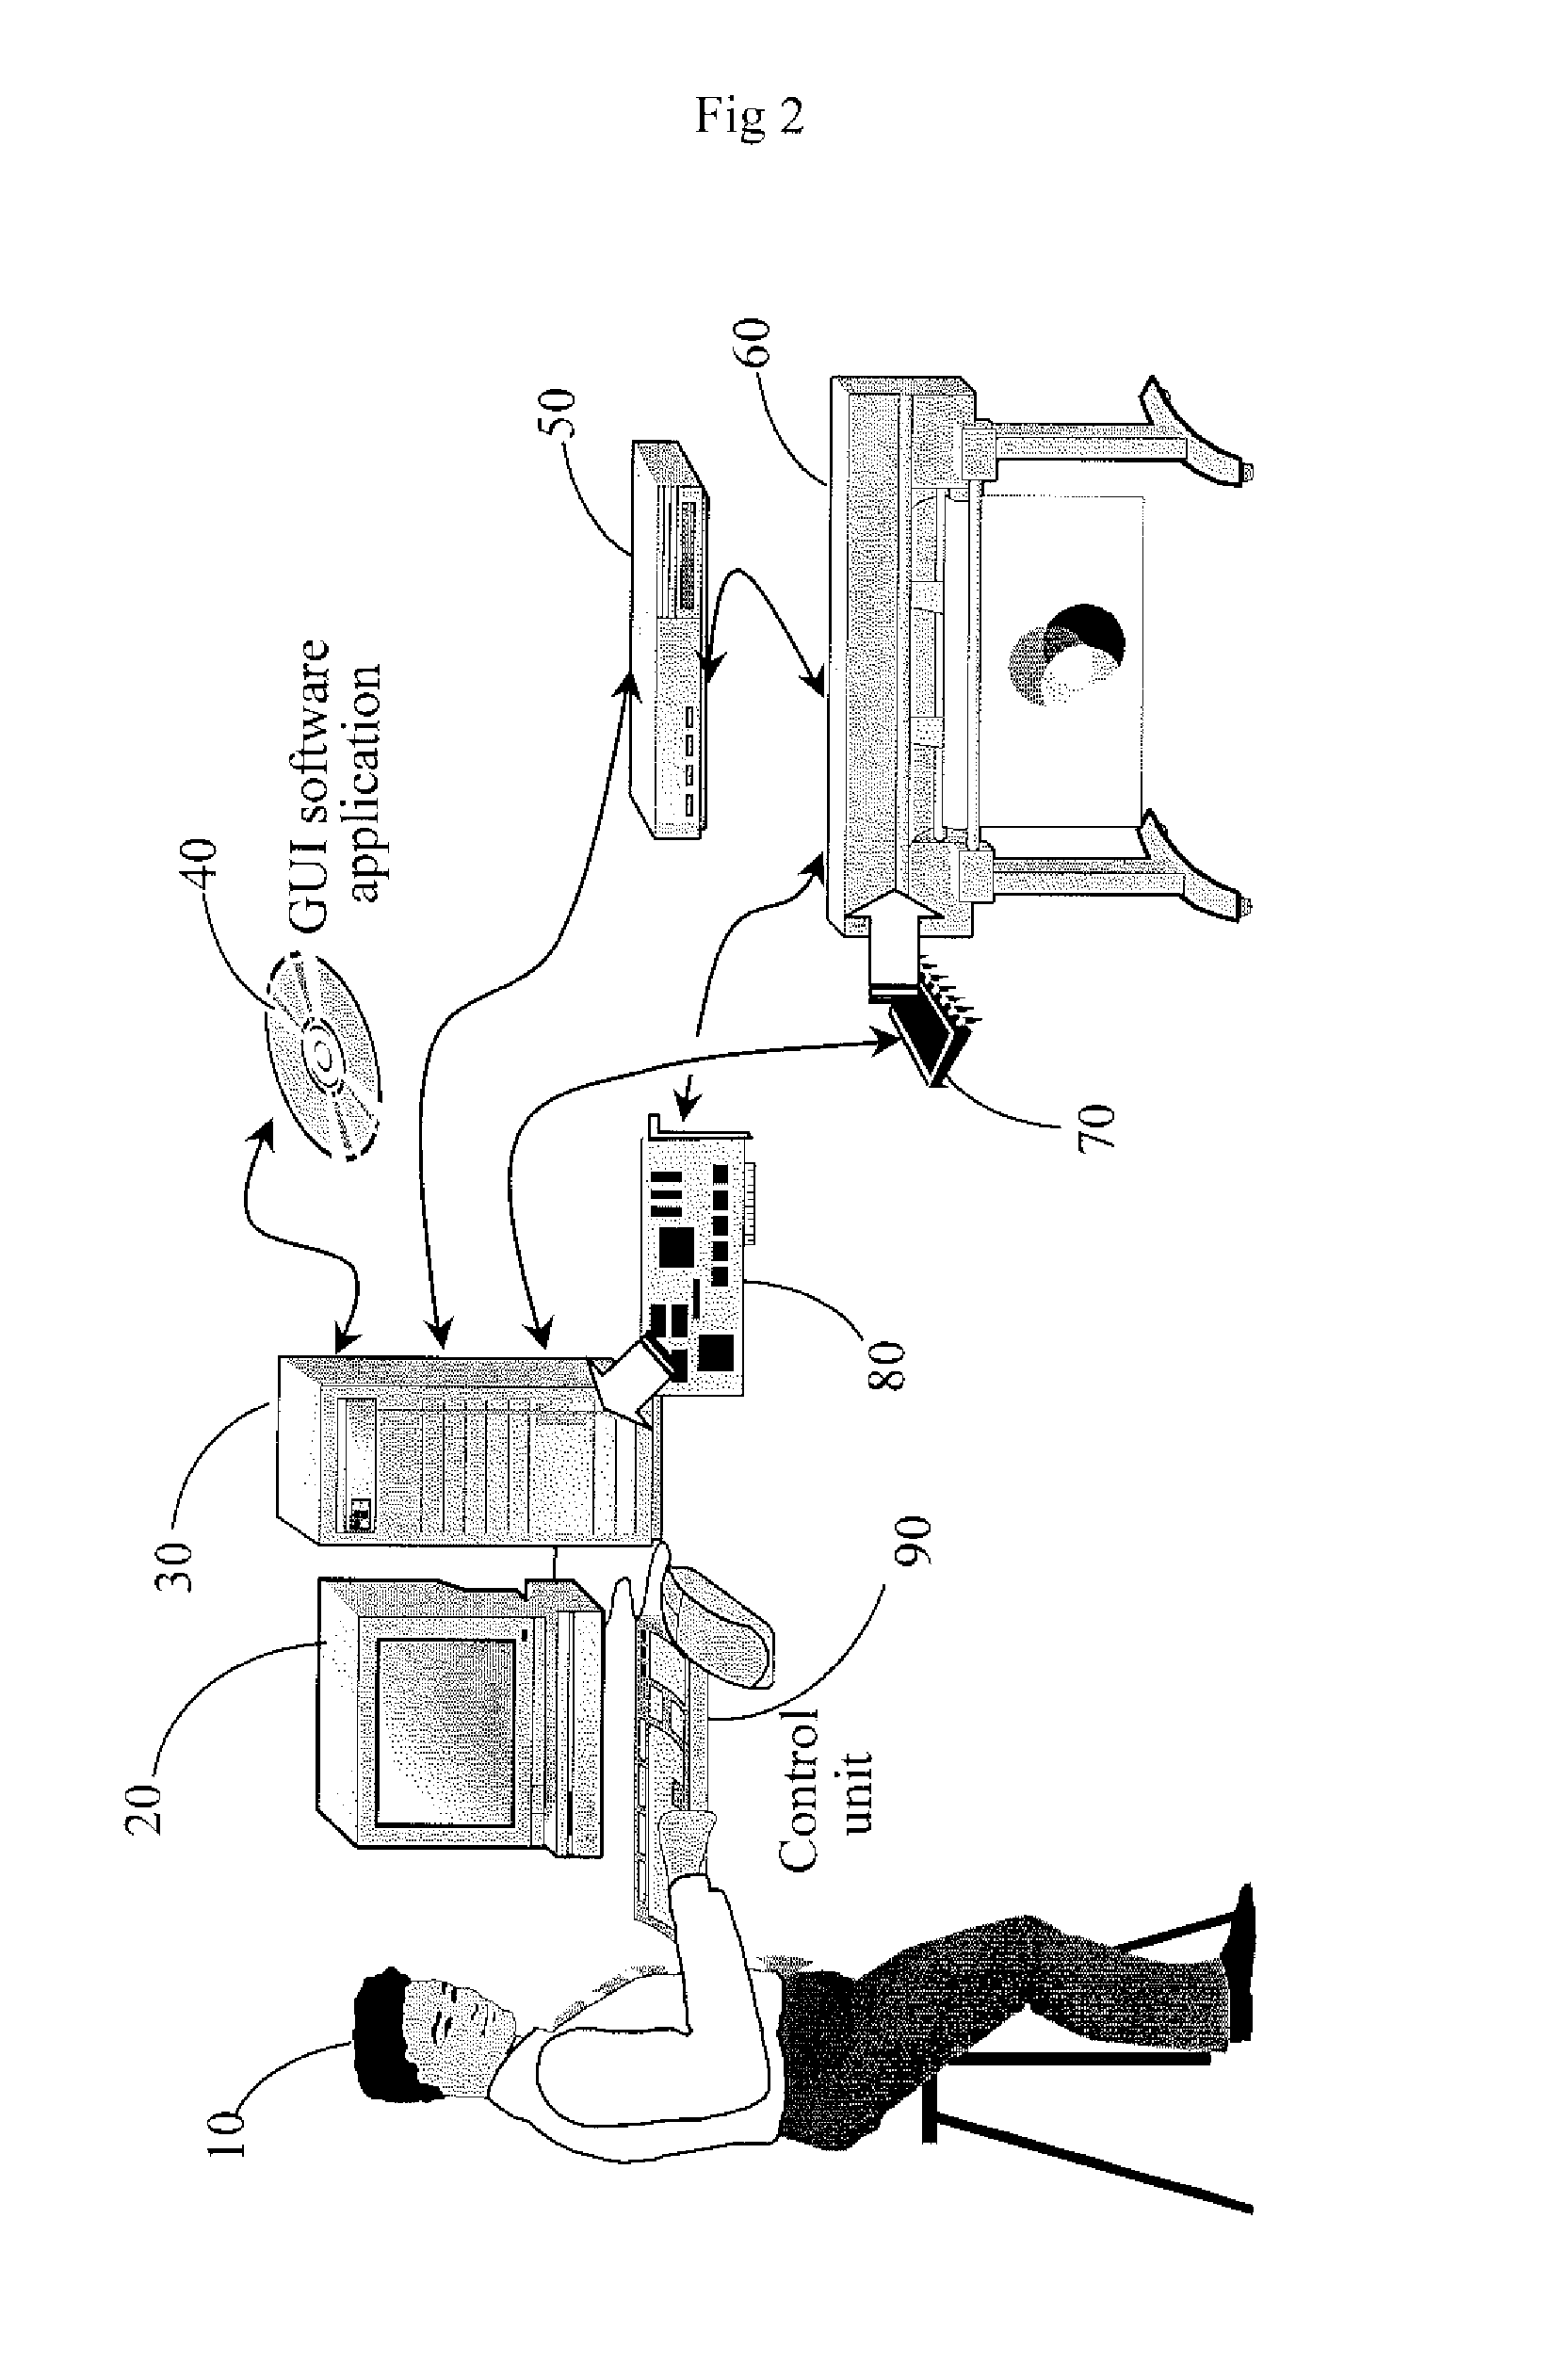 Apparatus and Method for Reducing Ink/ Toner Consumption of Color Printers